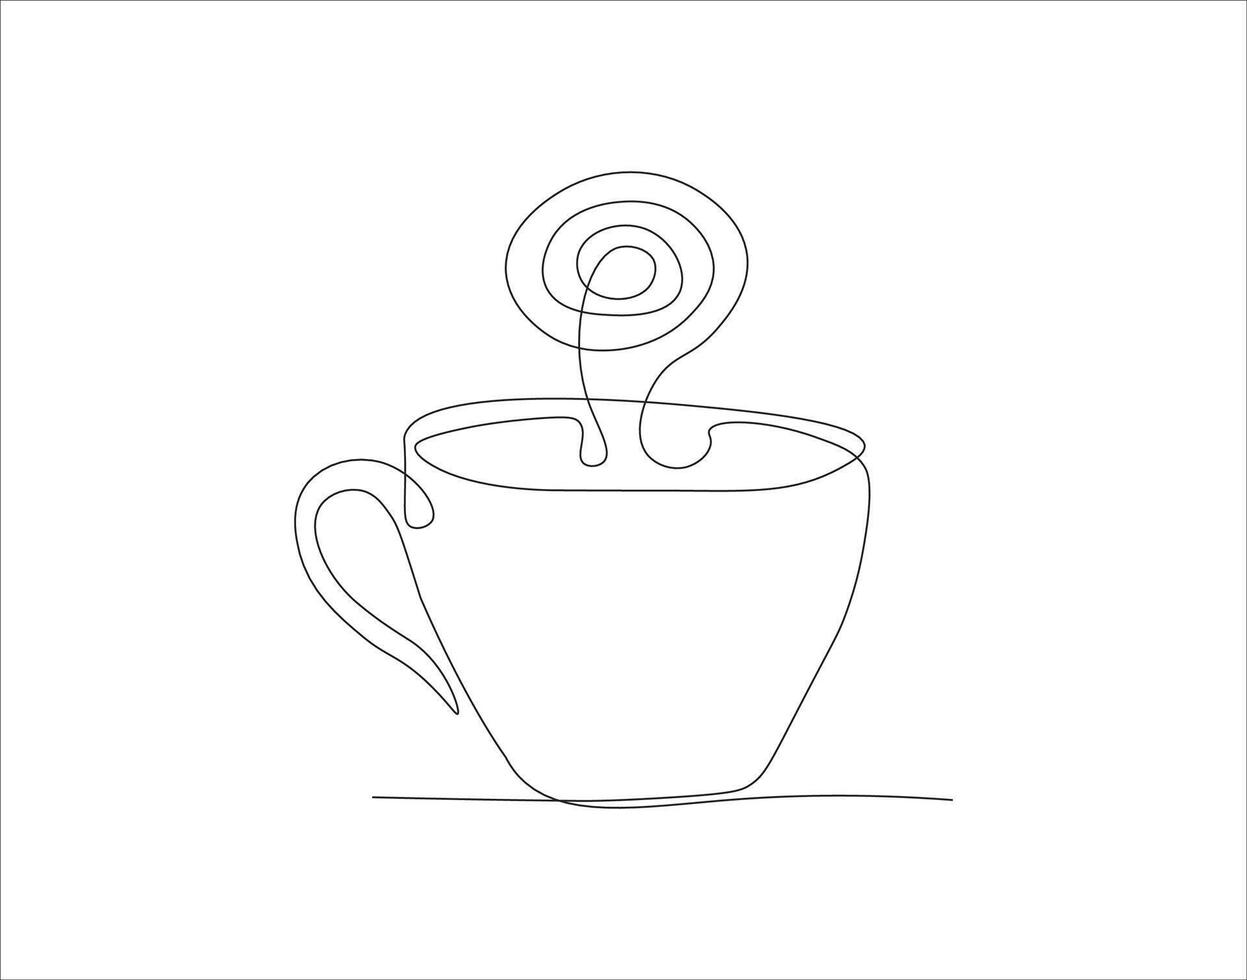 Continuous Line Drawing Of Cup Of Coffee. One Line Of Coffee. A Cup Of Coffee Continuous Line Art. Editable Outline. vector